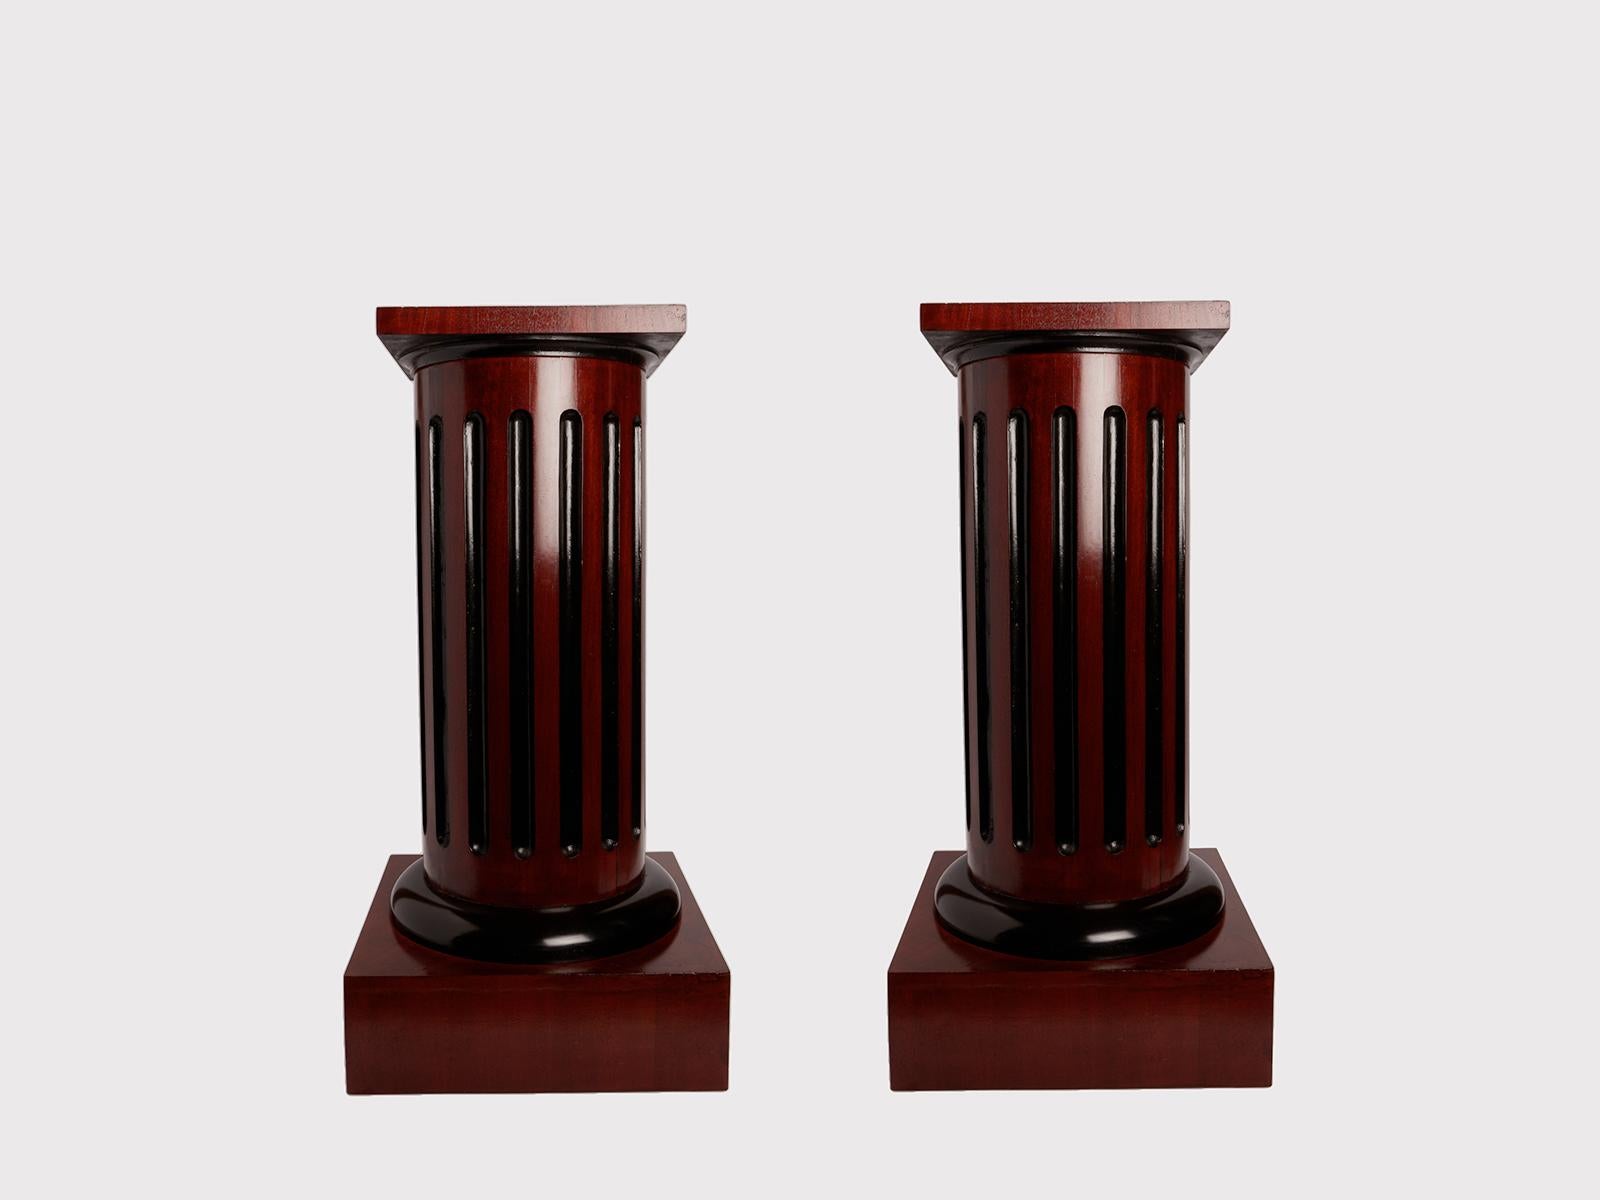 This pair of small round Russian columns, Biedermeir style are made out of fruitwood with Mahogany veneer. The column’s fluting are black lacquered. Russia circa 1890. 